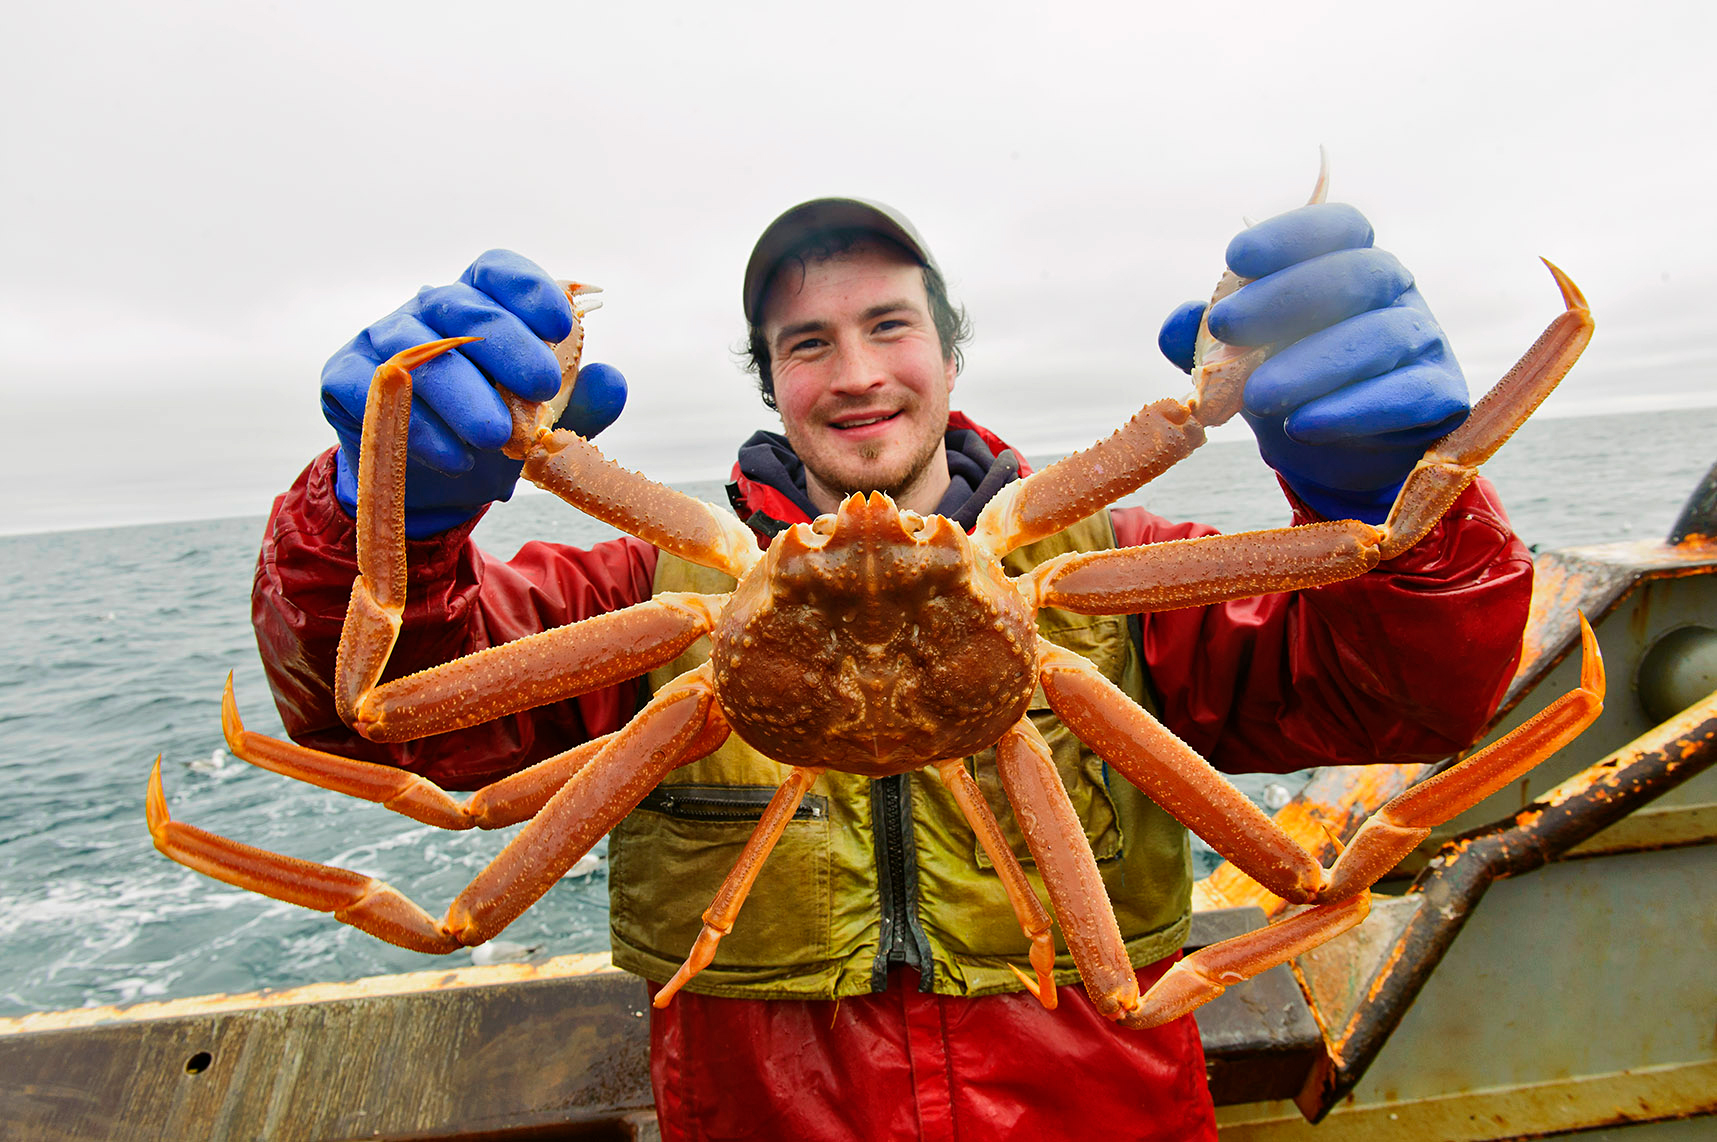 man on a boat holding a large crab